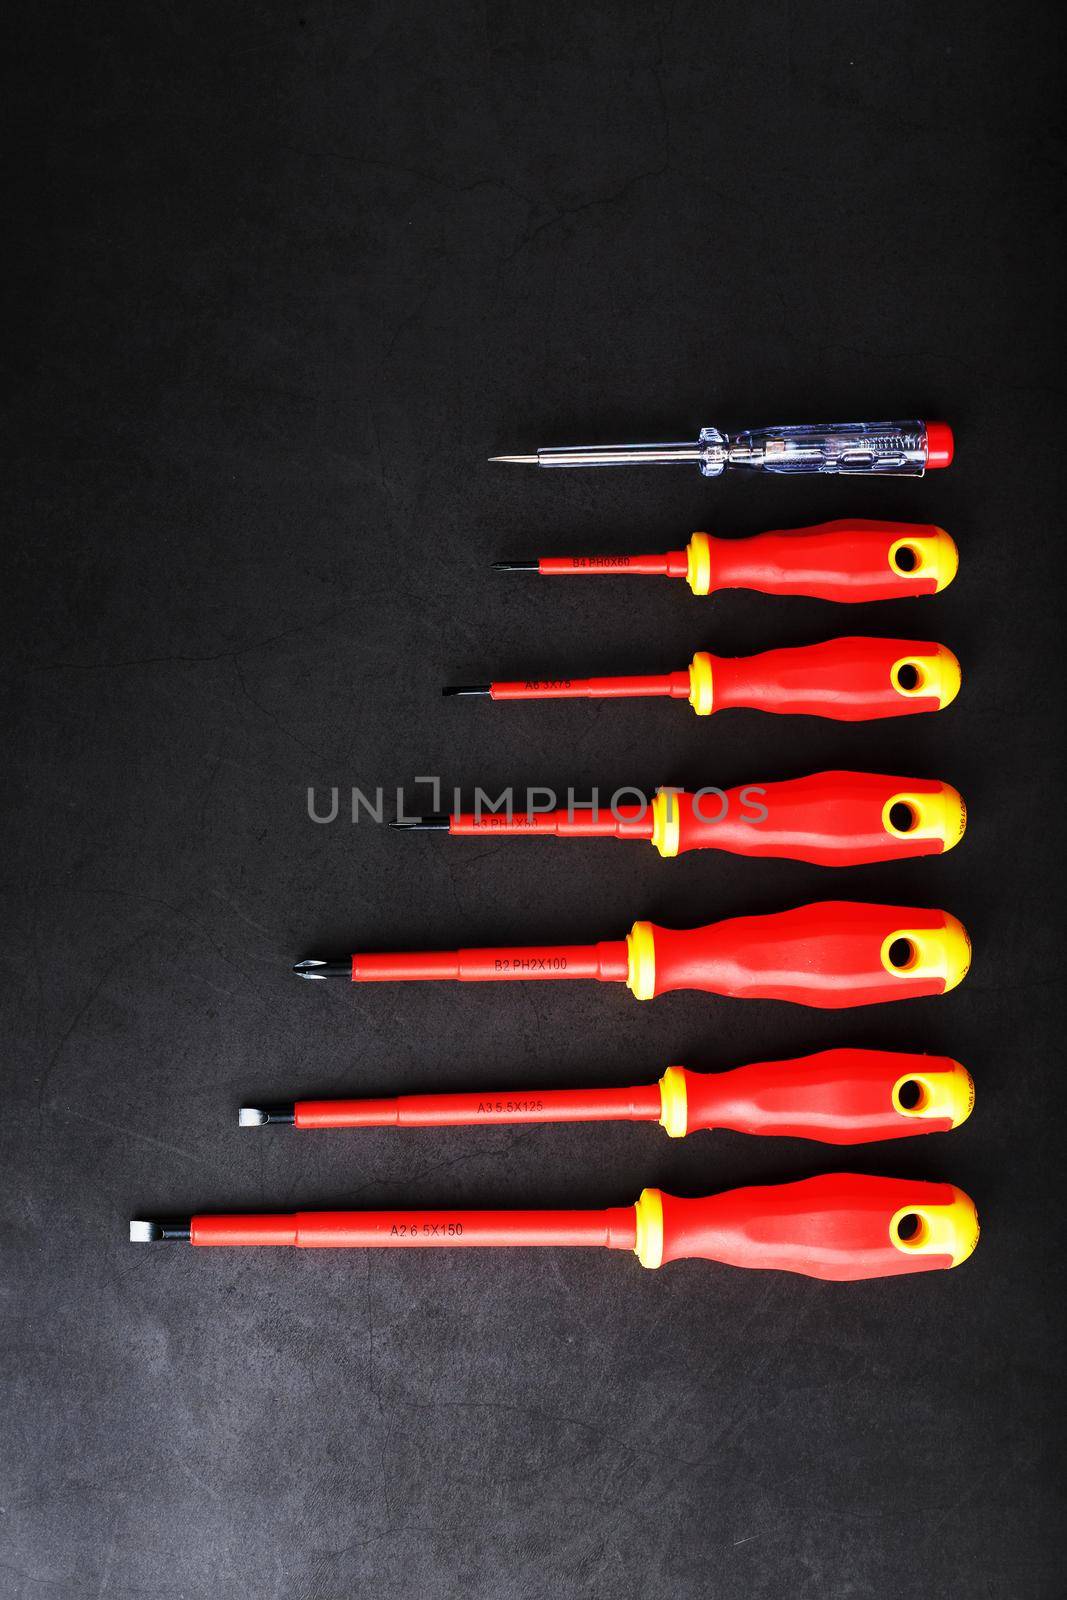 A set of red screwdrivers in a row on a black background. by AlexGrec